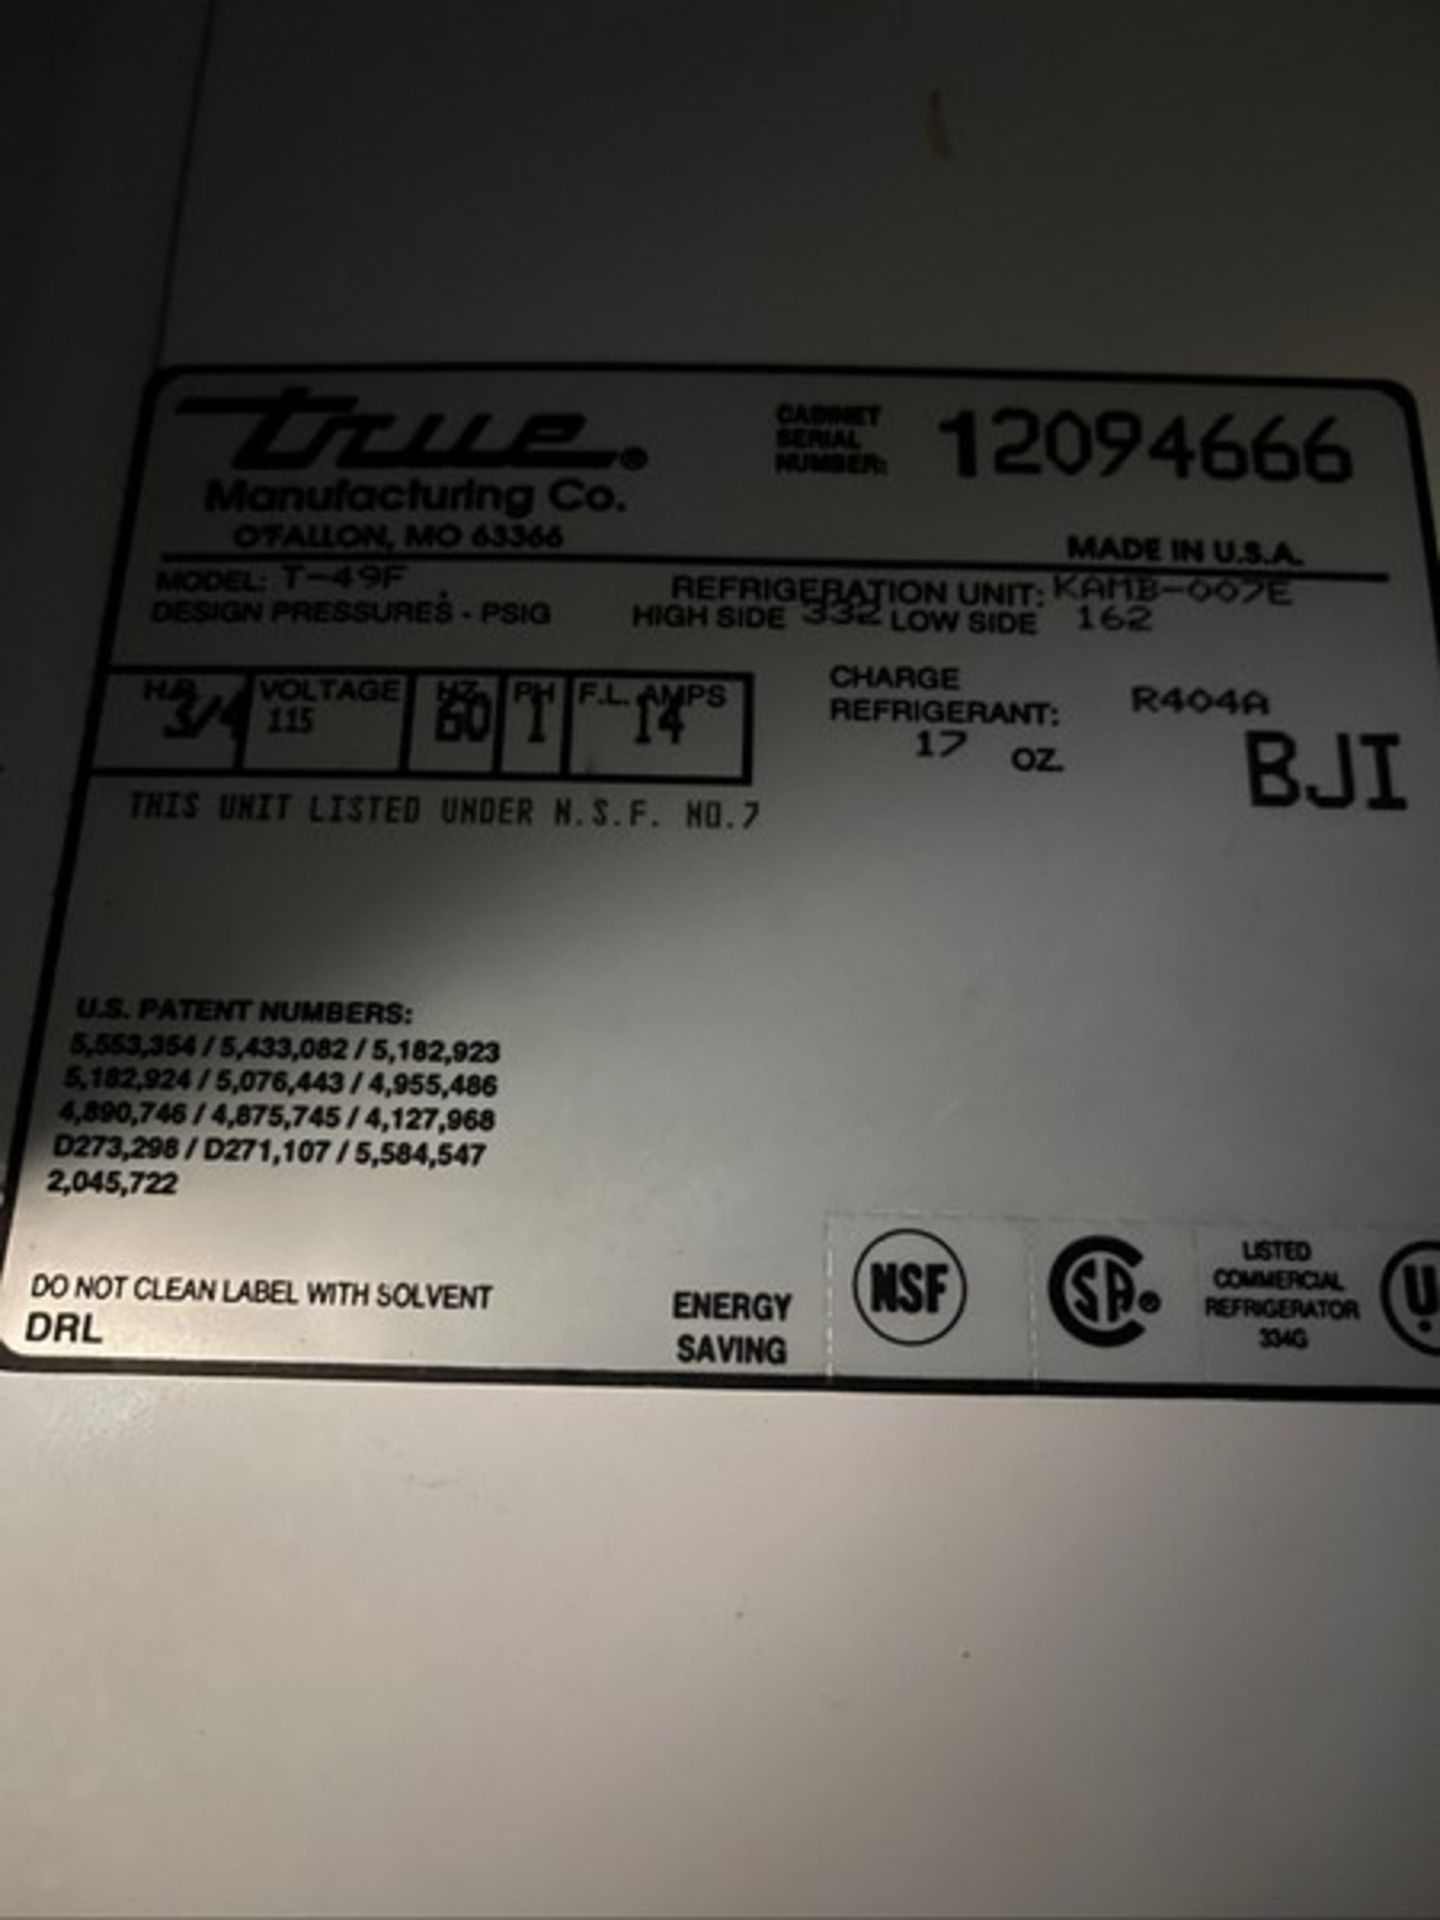 TRUE MANUFACTURING 2-DOOR S/S FREEZER, MODEL T-49F, S/N 12094666, 115 V, 1 PHASE(INV#80362)( - Image 2 of 2